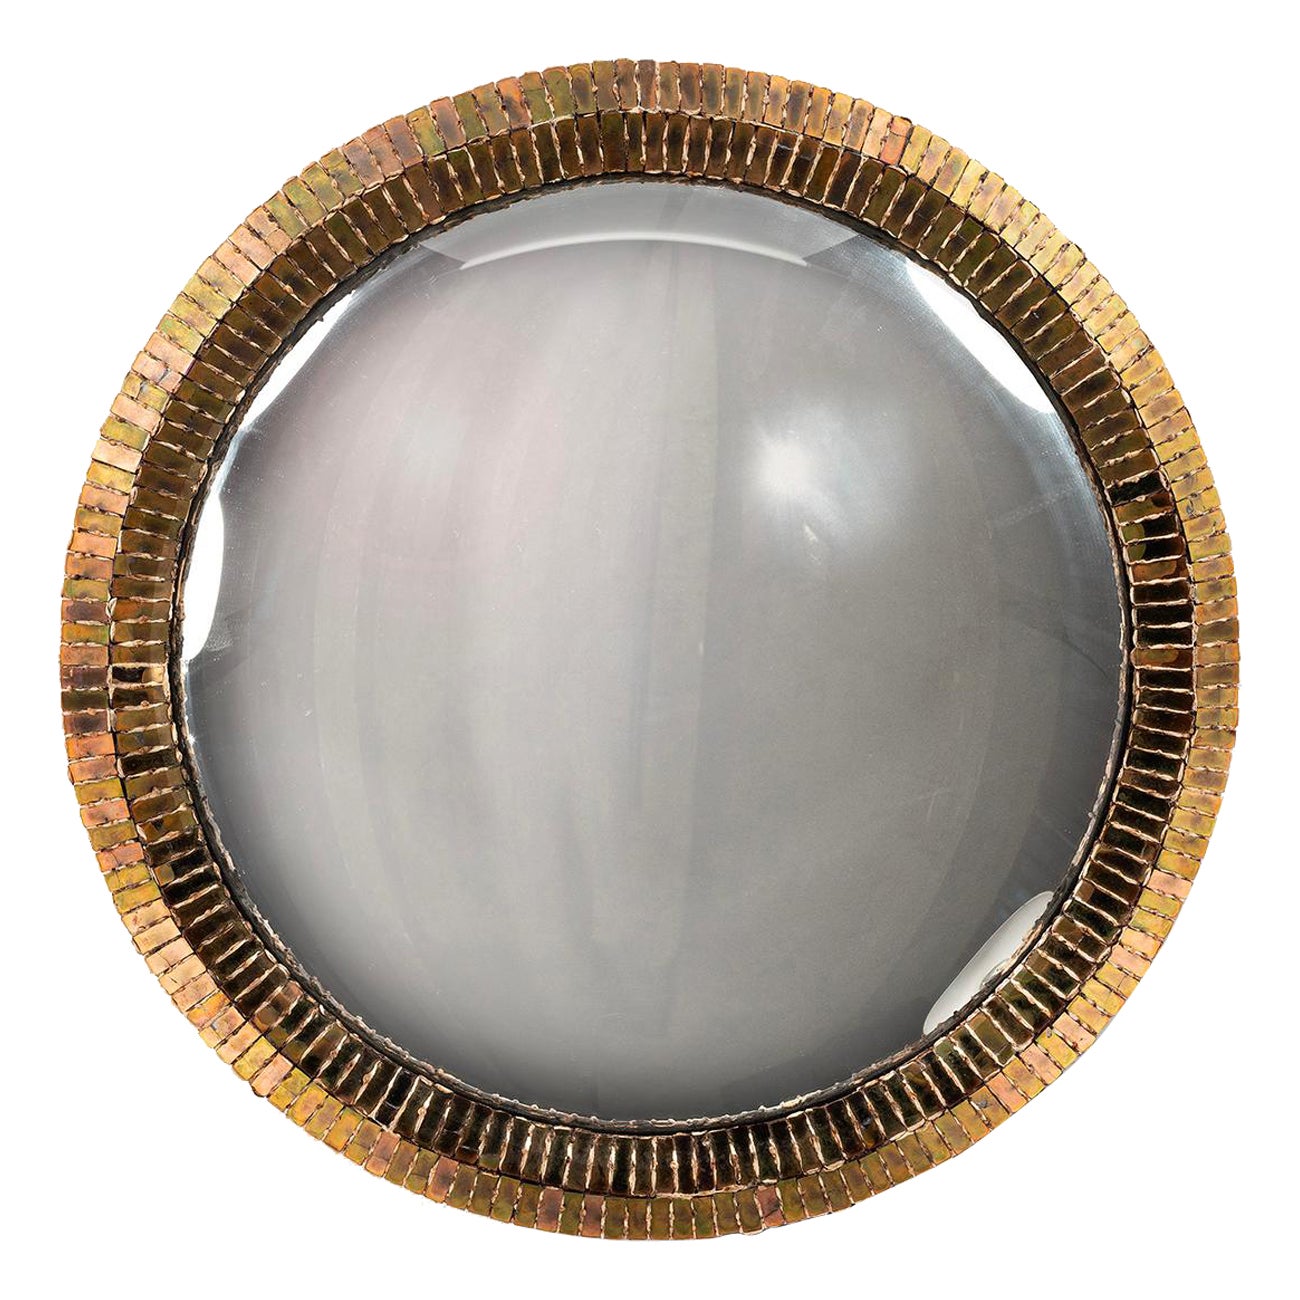 Couronne, Talosel Mirror with a Bronze Mirrors-Embedded Frame, Line Vautrin